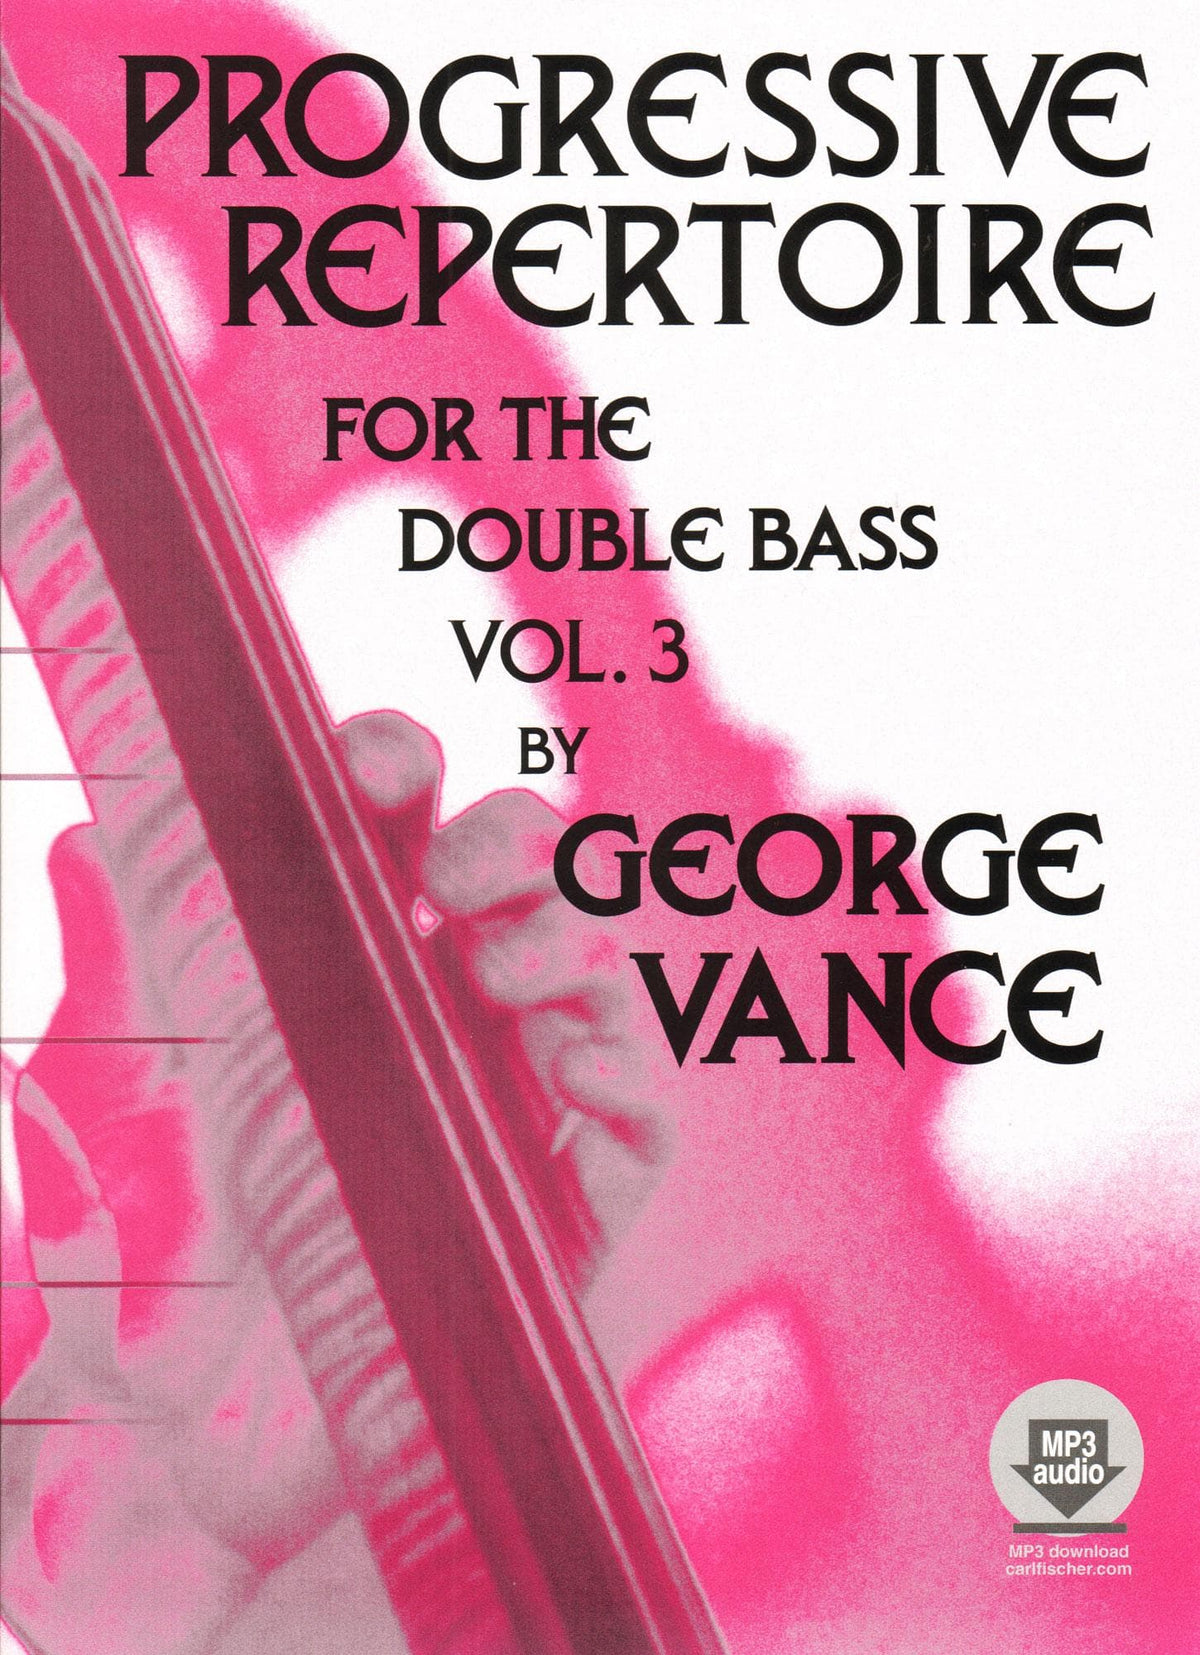 Progressive Repertoire for the Double Bass - Volume 3 Bass Book - by George Vance - Published by Carl Fischer